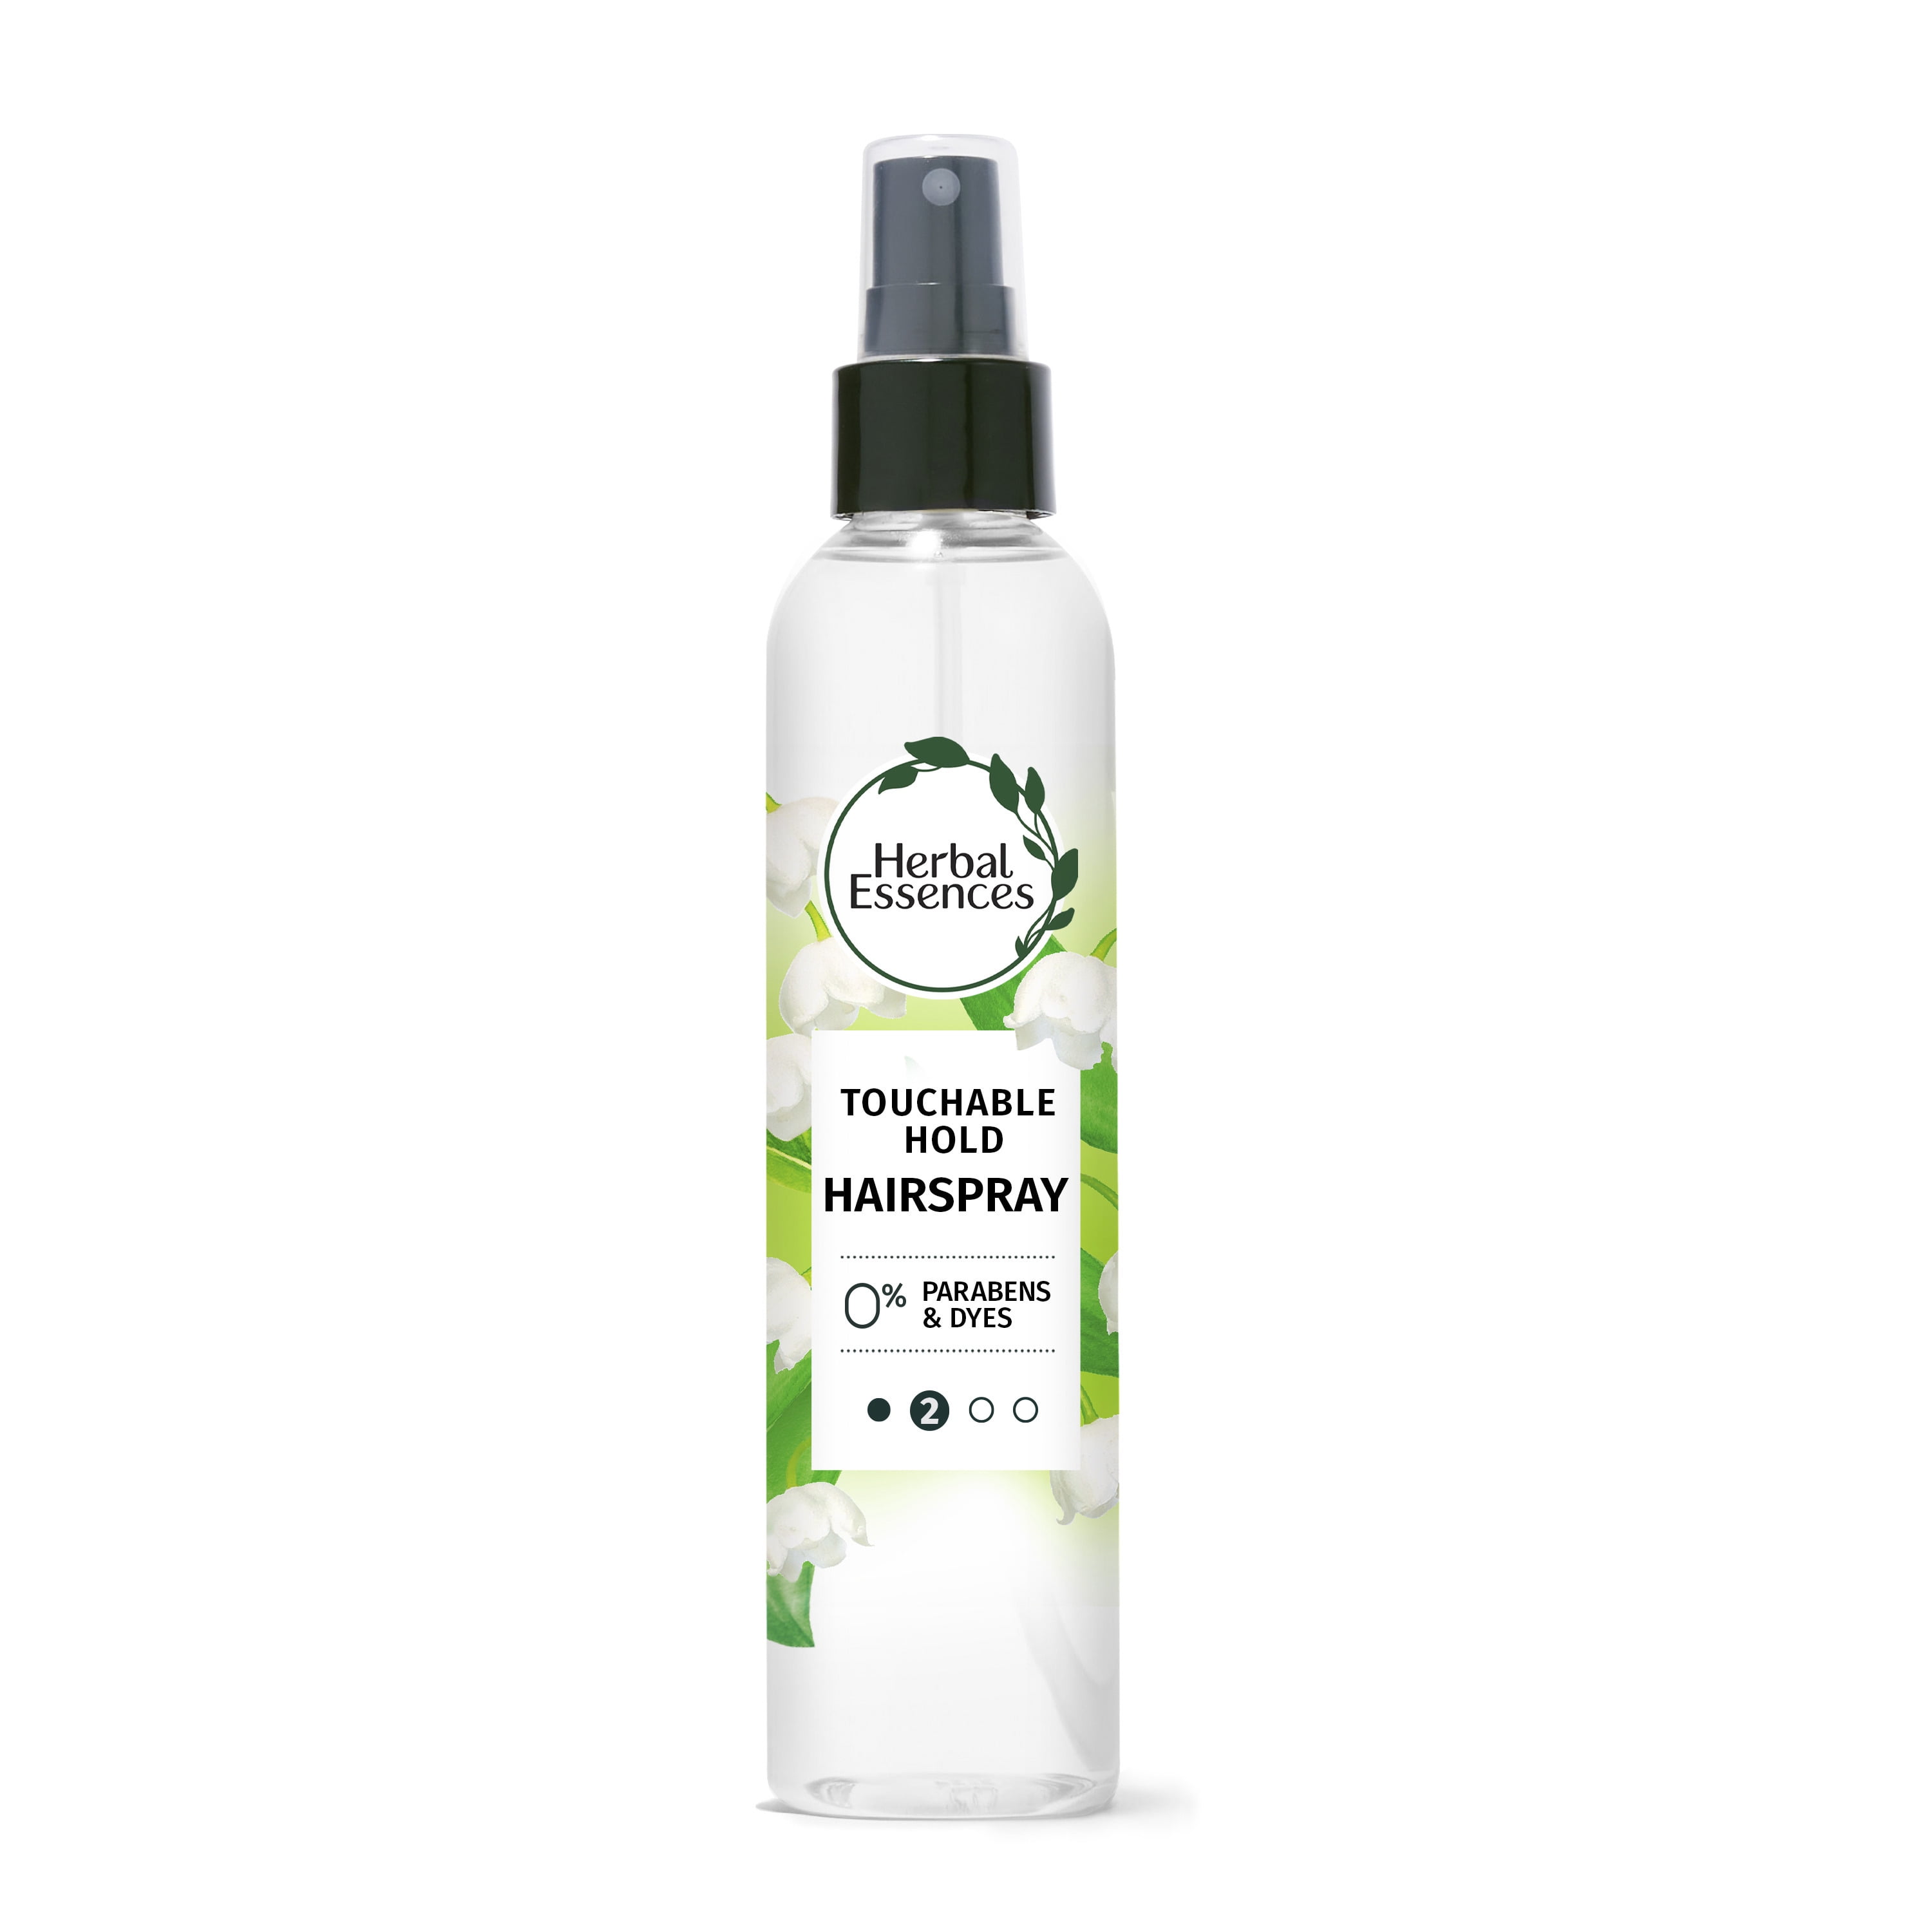  Aussie Hairspray, with Jojoba & Sea Kelp, Instant Freeze,  Extreme Hold, 8.5 fl oz, Triple Pack : Beauty & Personal Care